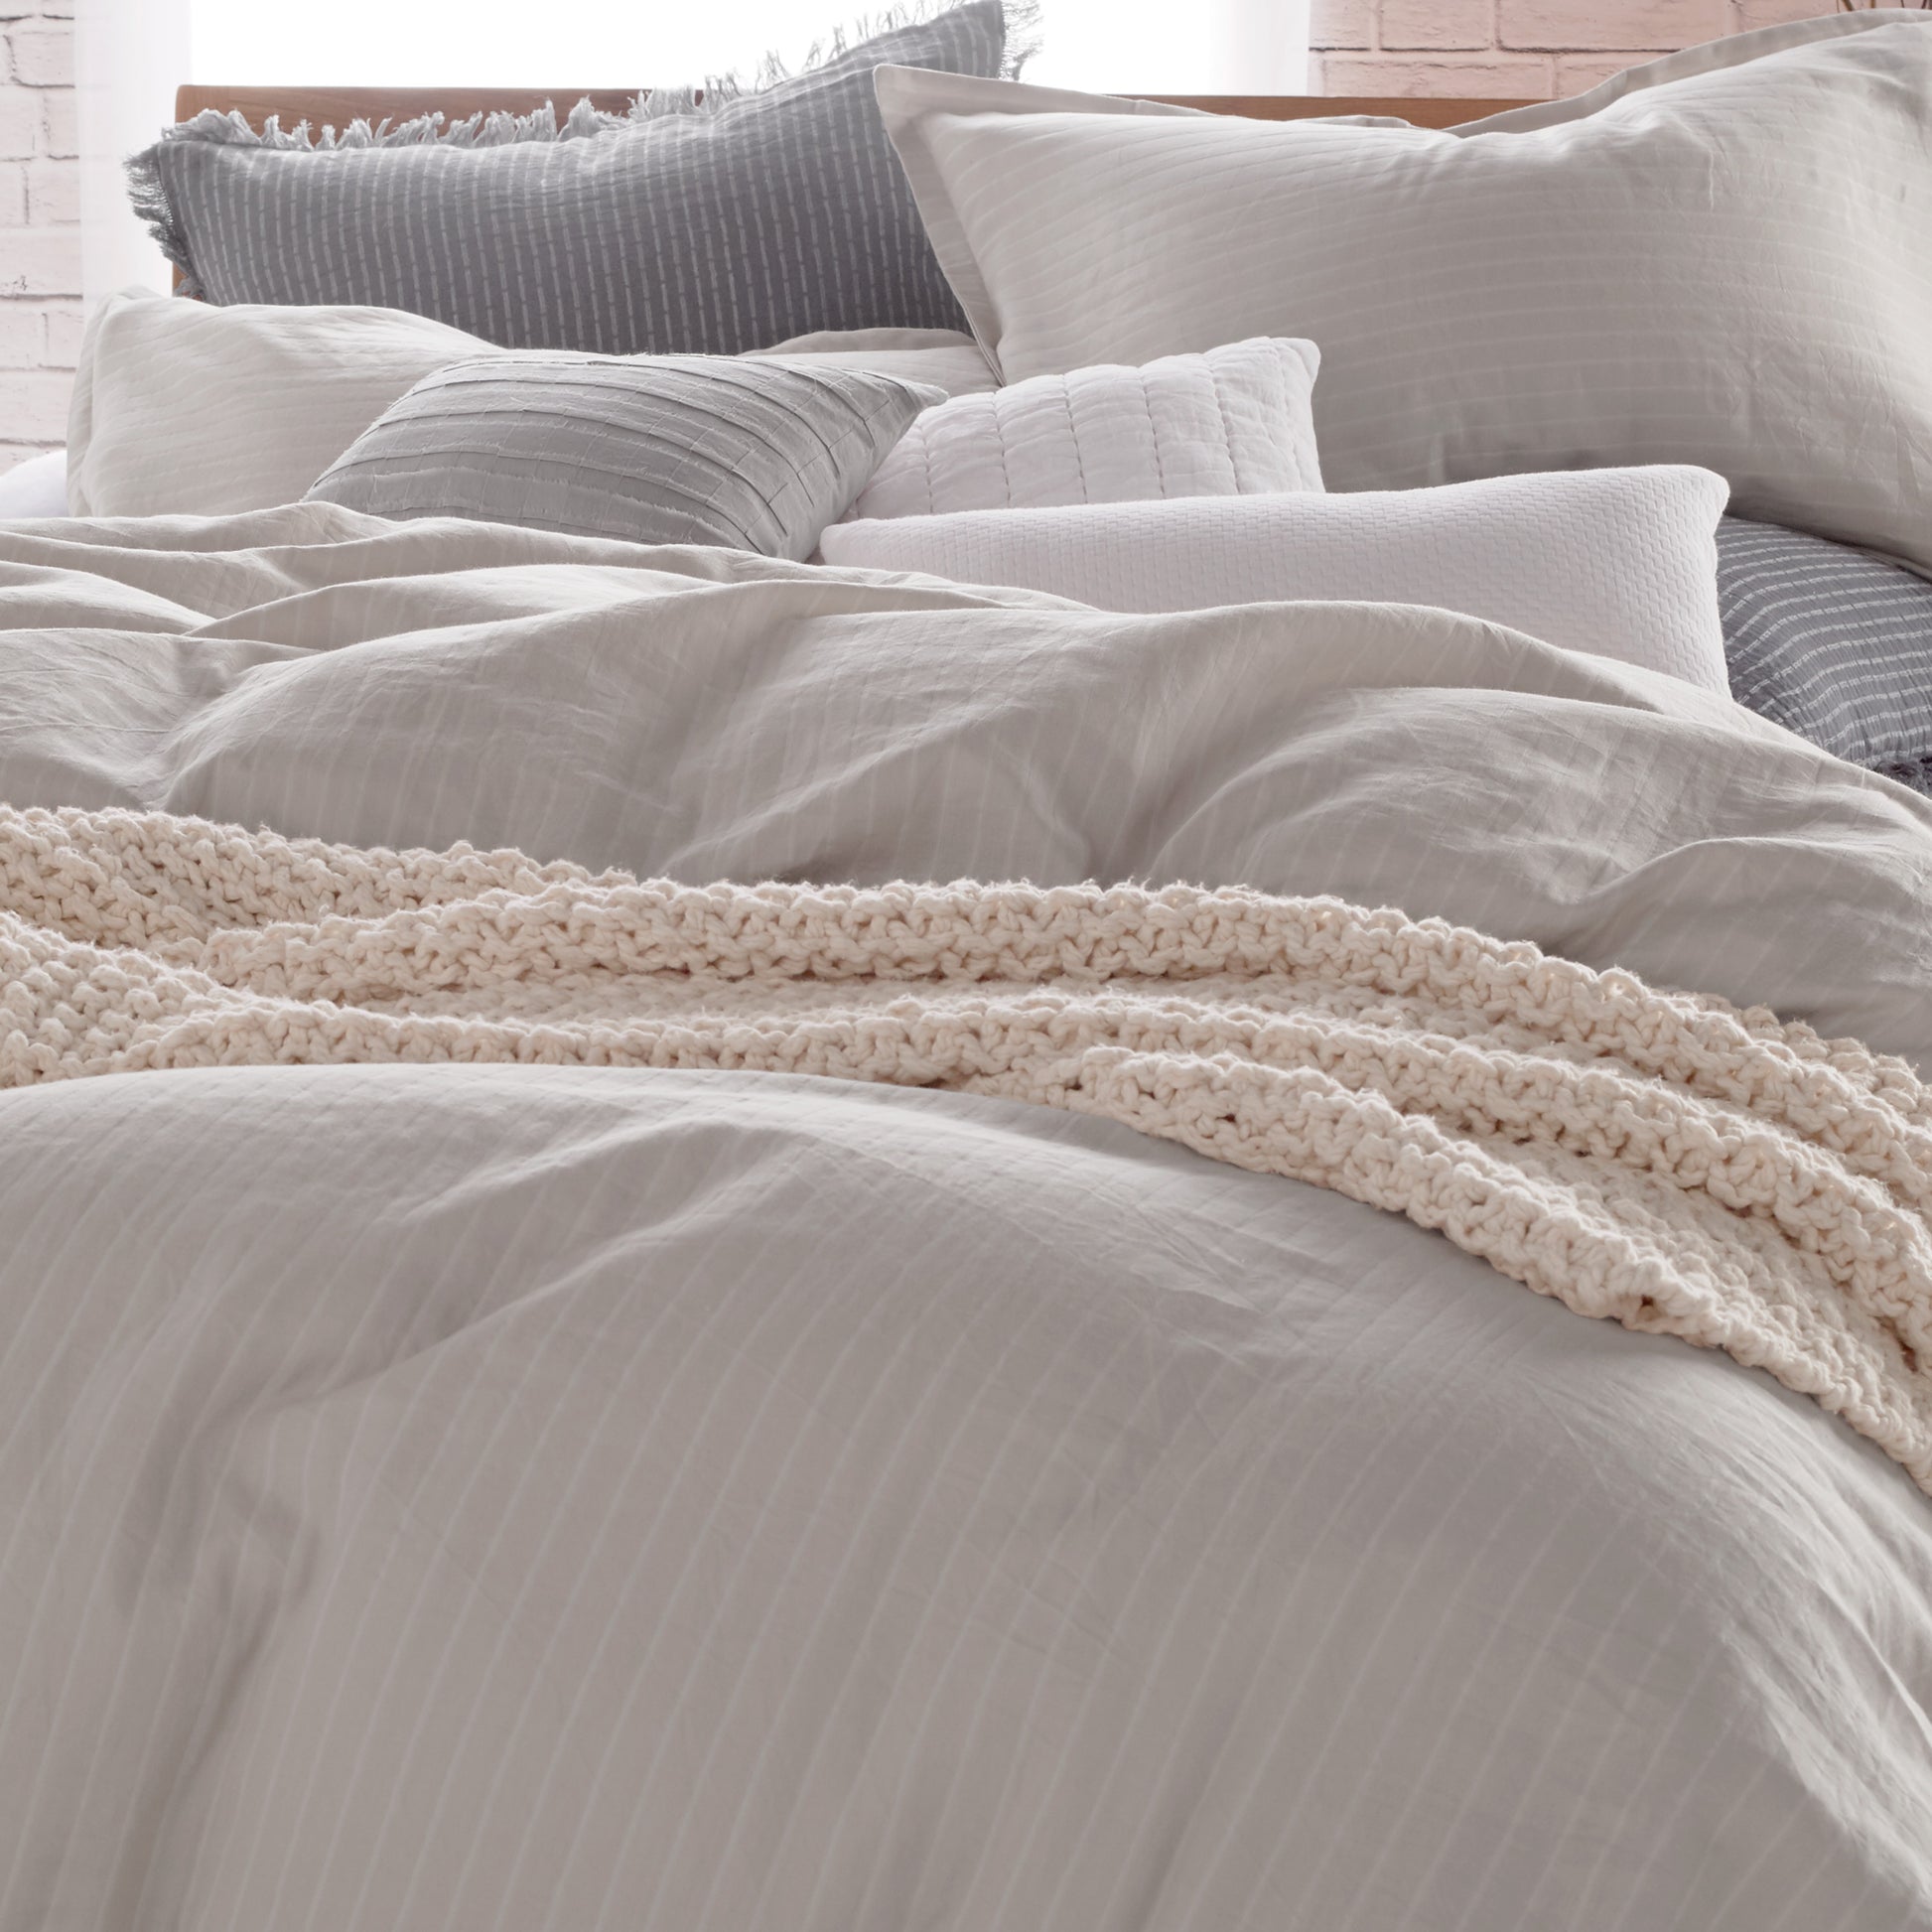 DKNY PURE Comfy Bedding Comforter Collection Platinum Grey